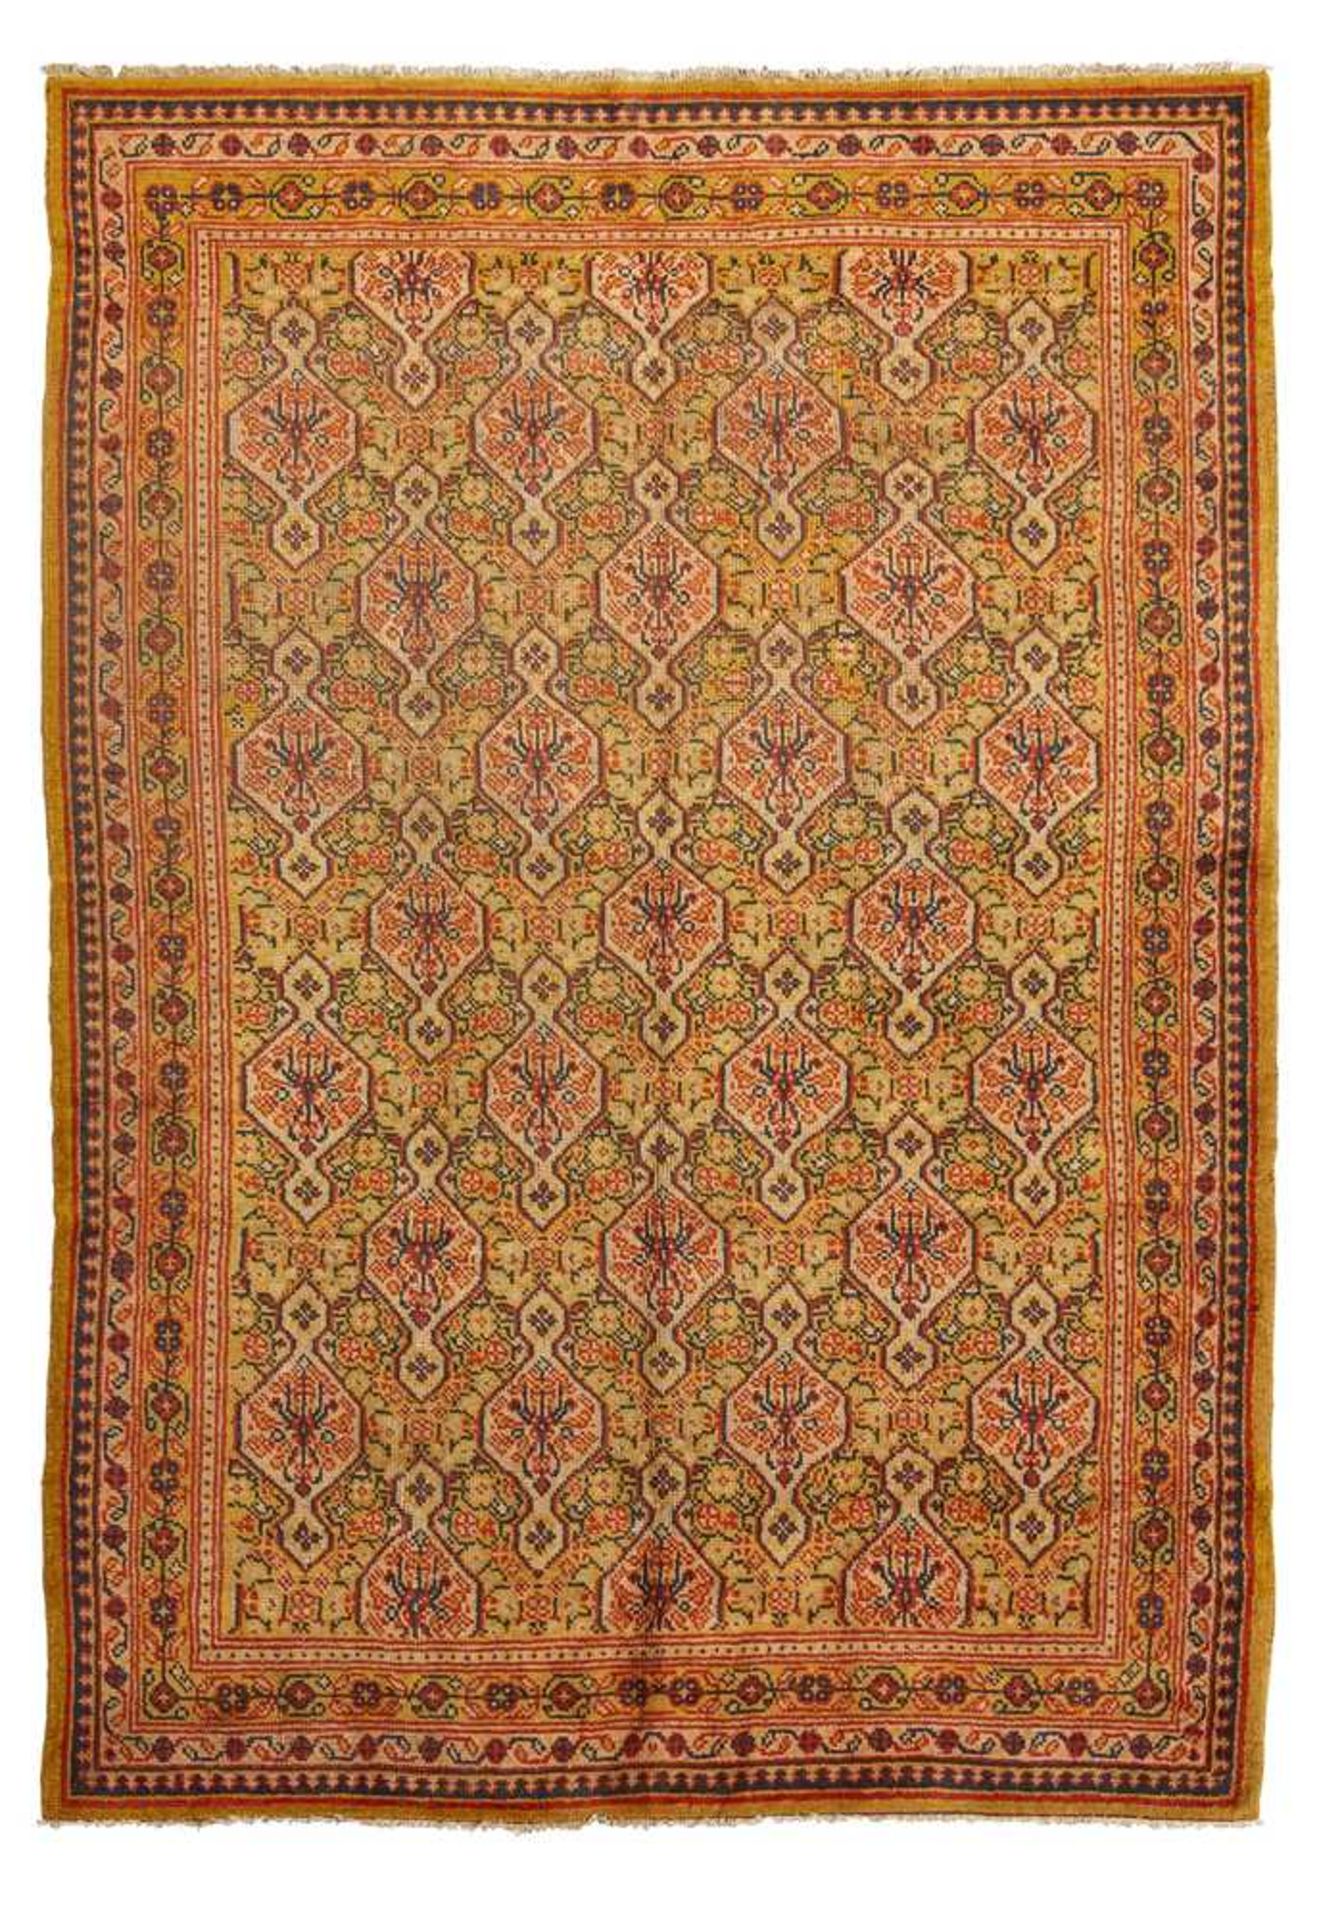 DONEGAL CARPET NORTHWEST IRELAND, LATE 19TH/EARLY 20TH CENTURY